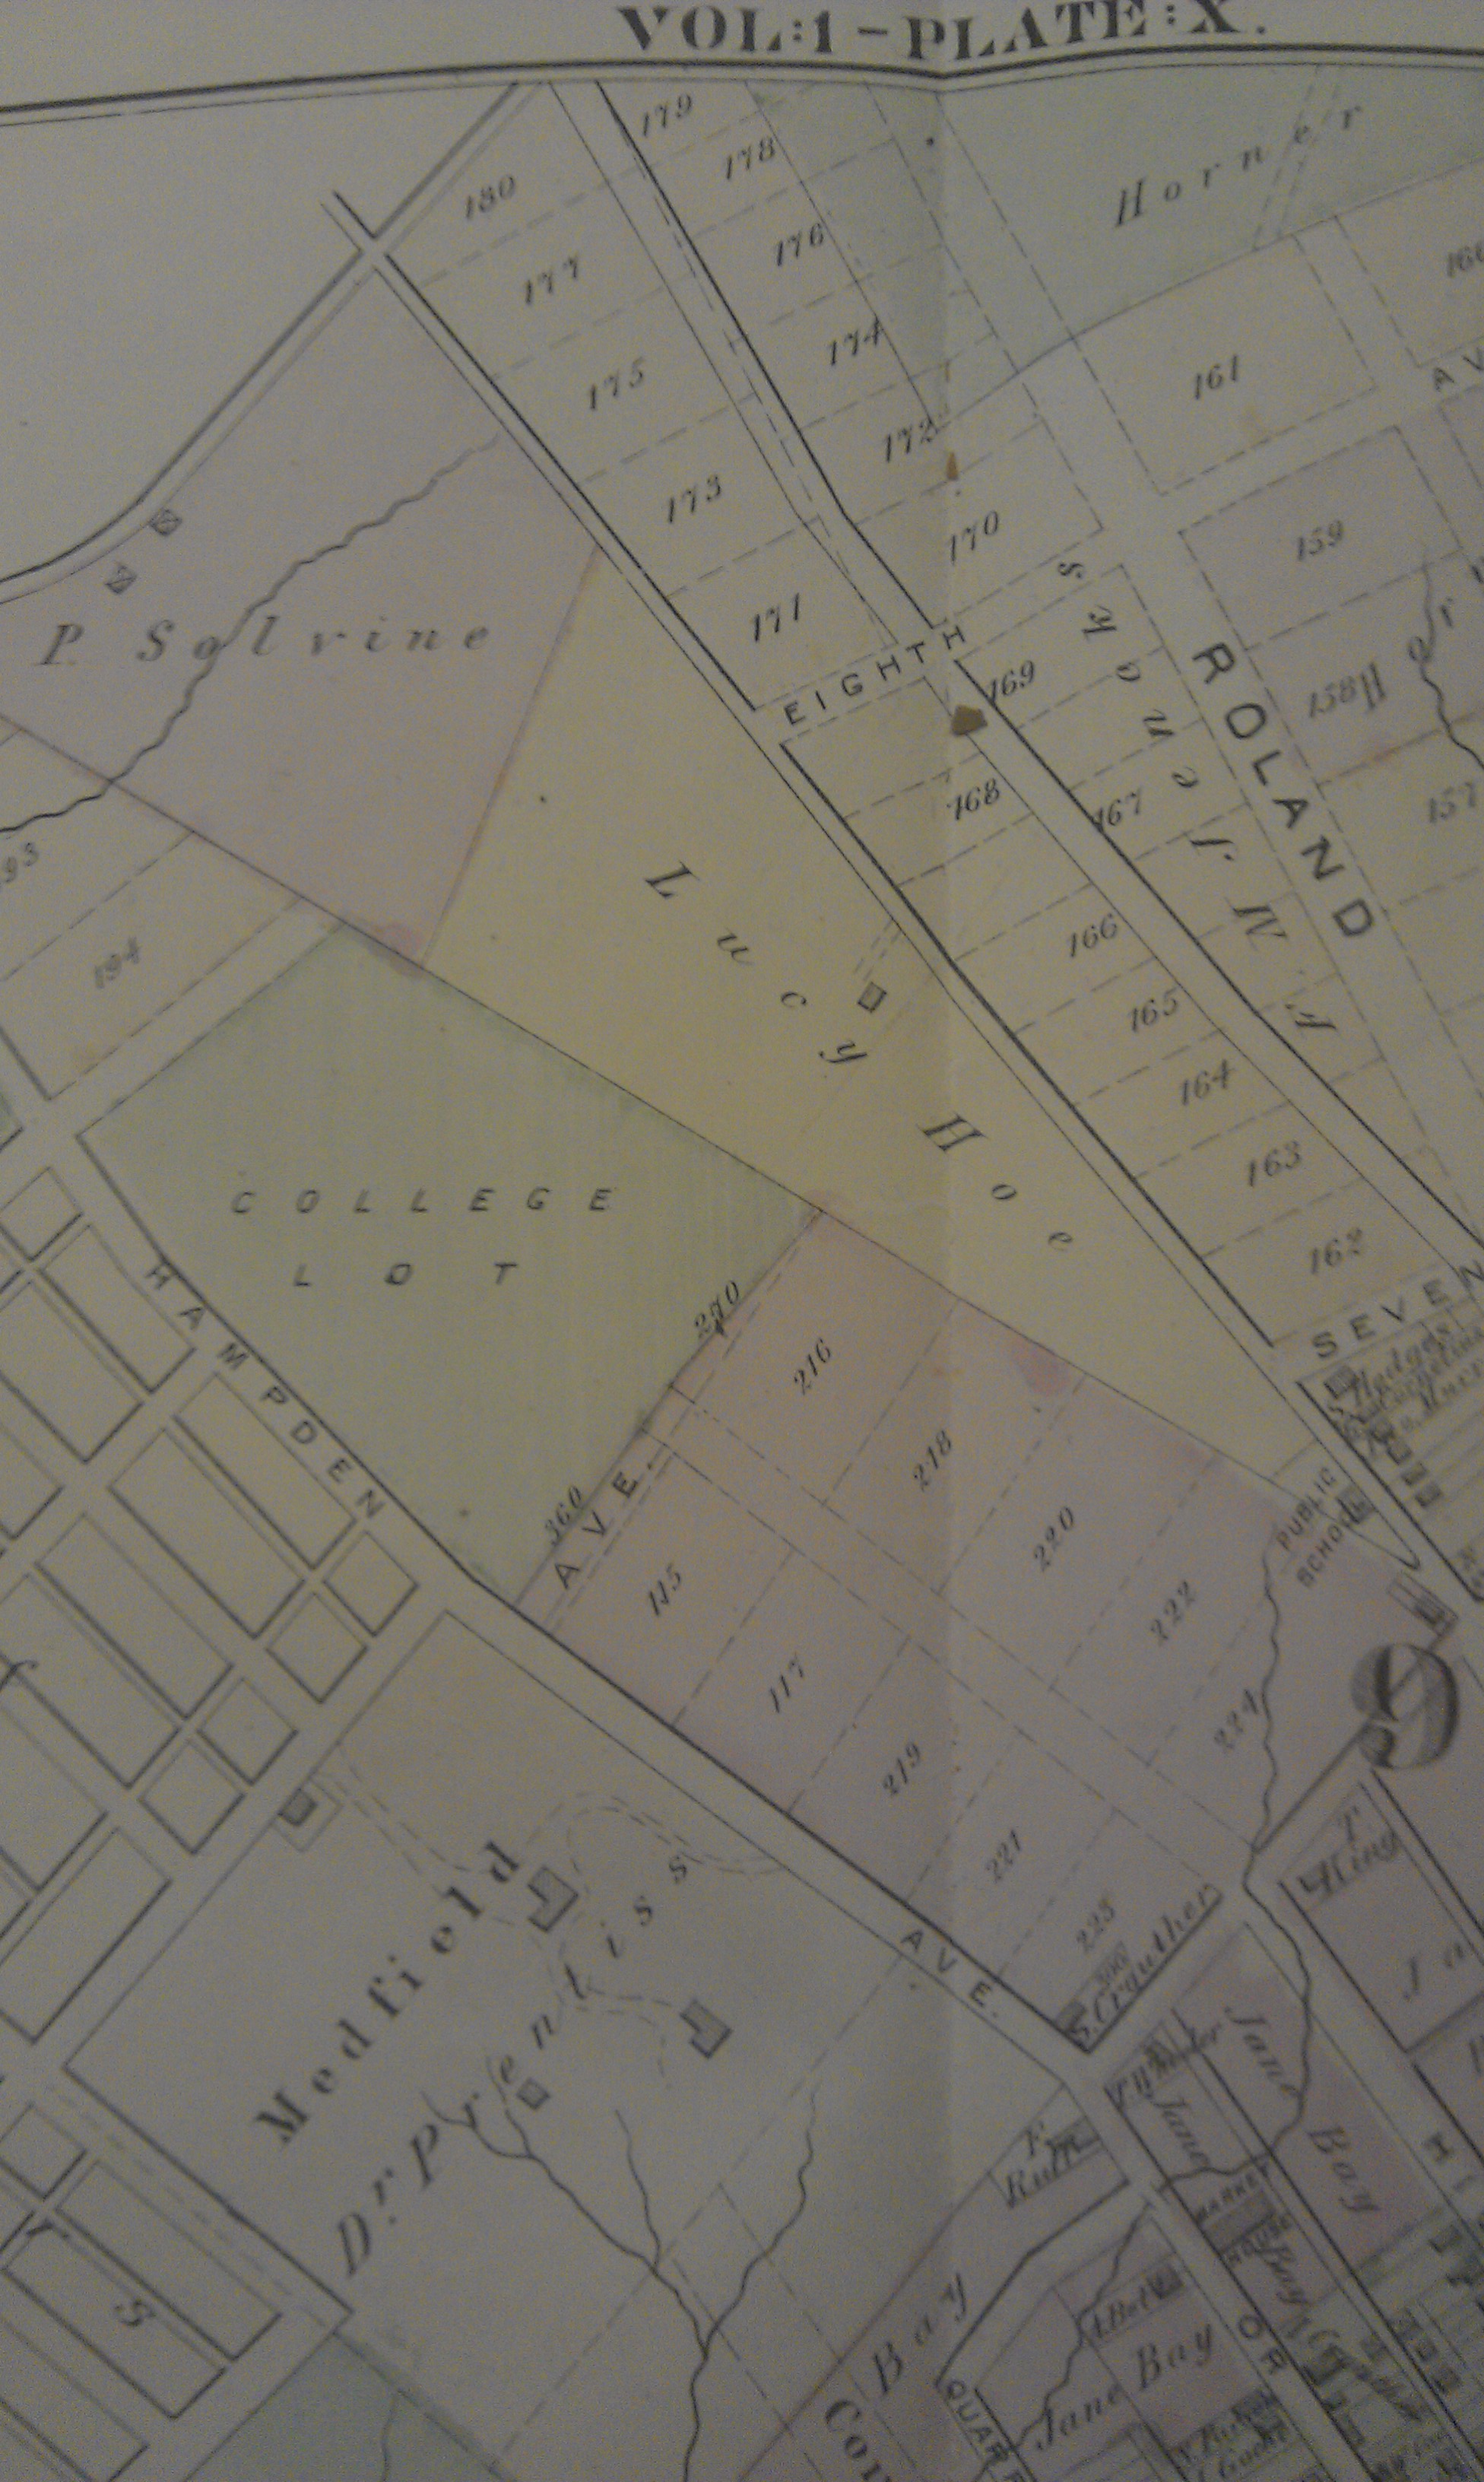 Lucy Hoe's plot of land. Taken from the Atlas of Baltimore and its Environs, 1877, MdHS.